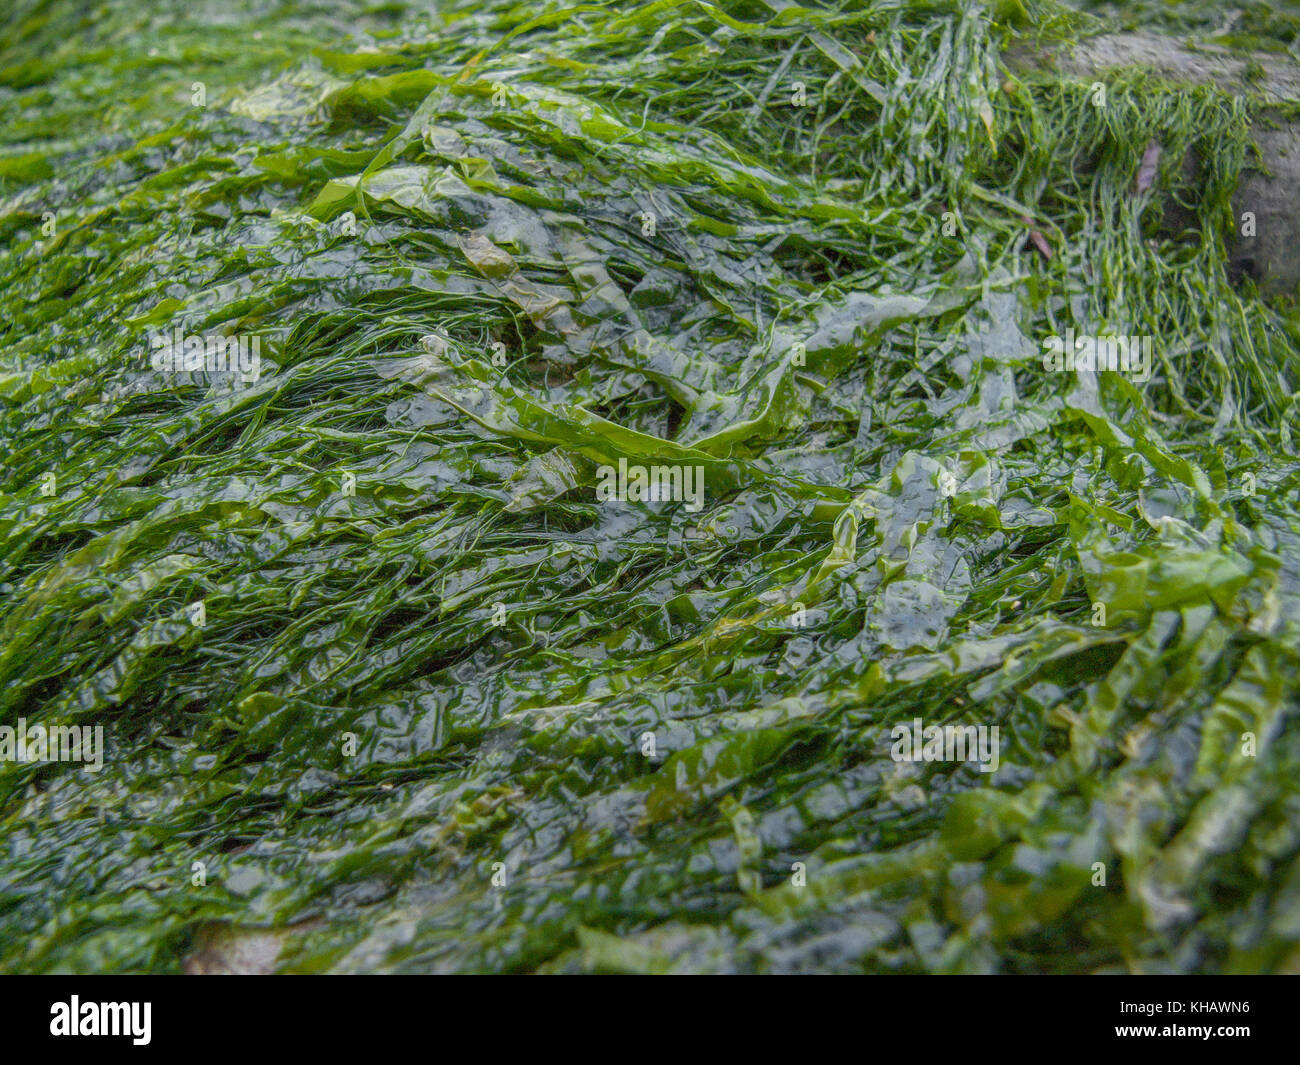 The grass-like seaweed species Enteromorpha - known as Gutweed - growing on rocks near high-tide line. Exact species uncertain. Used as survival food. Stock Photo